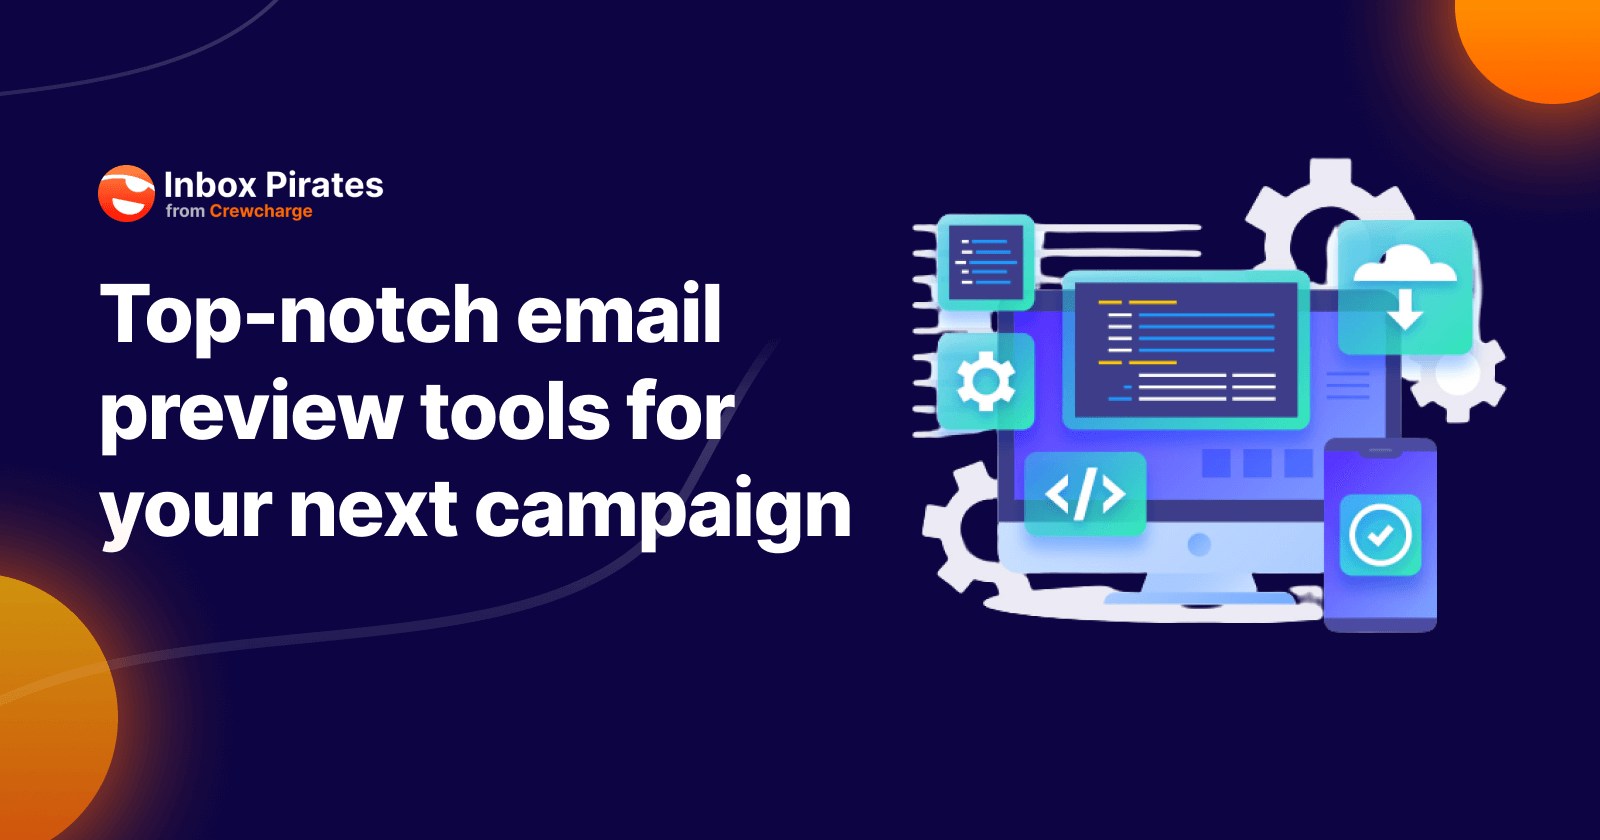 The top-notch email preview tool that promotes a confident email campaign